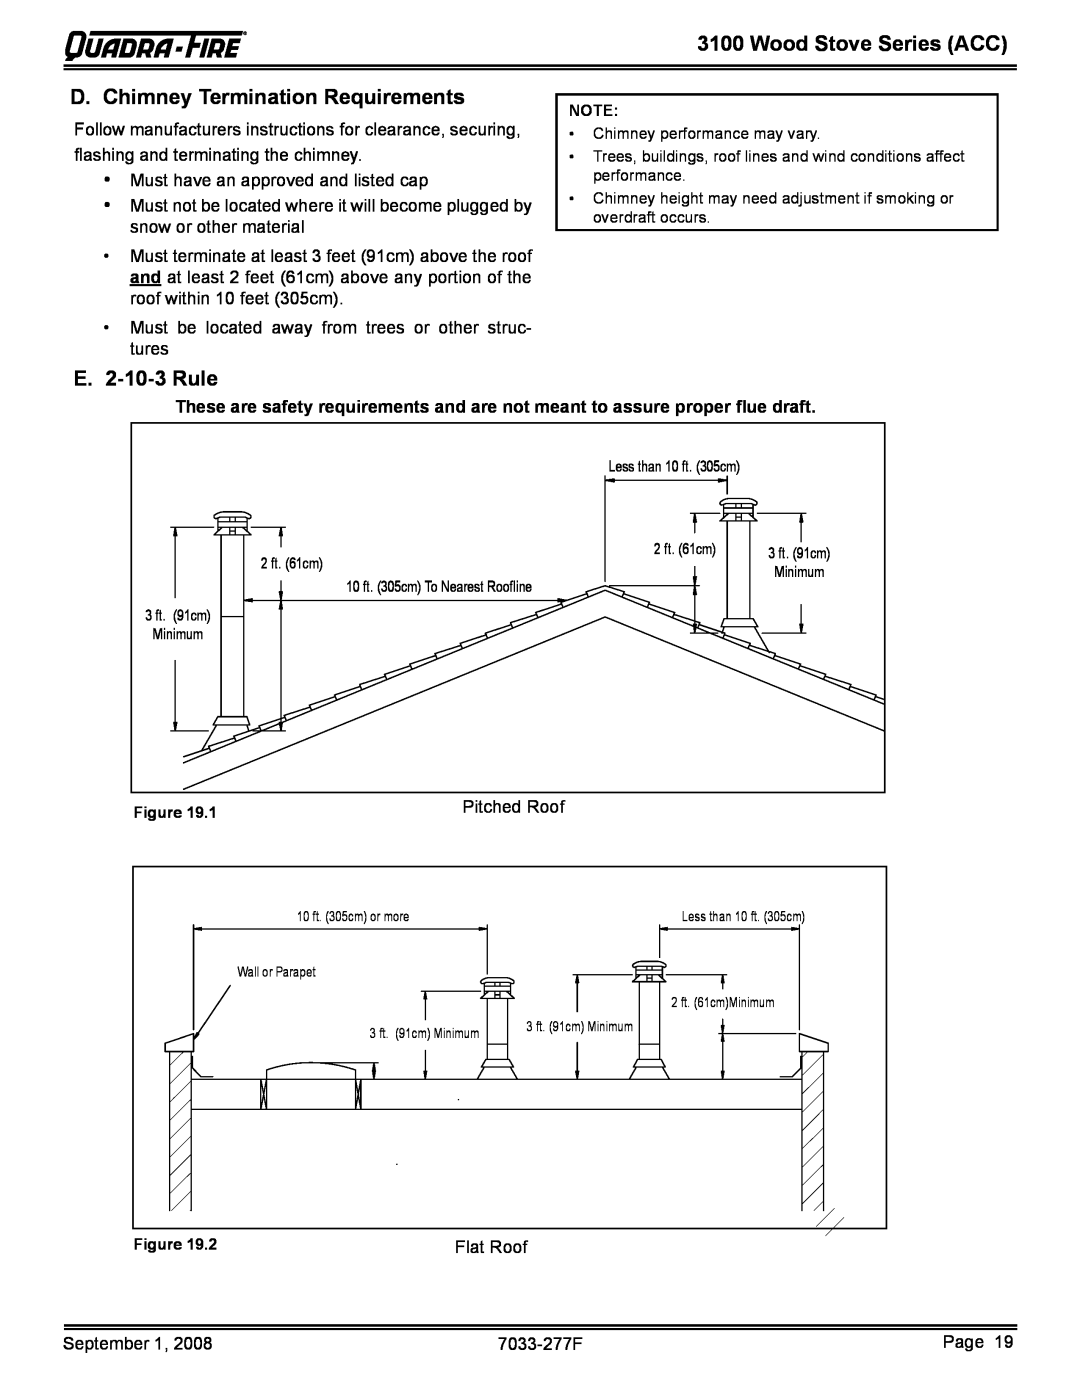 Hearth and Home Technologies 31M-ACC-MBK D. Chimney Termination Requirements, E. 2-10-3 Rule, Wood Stove Series ACC 